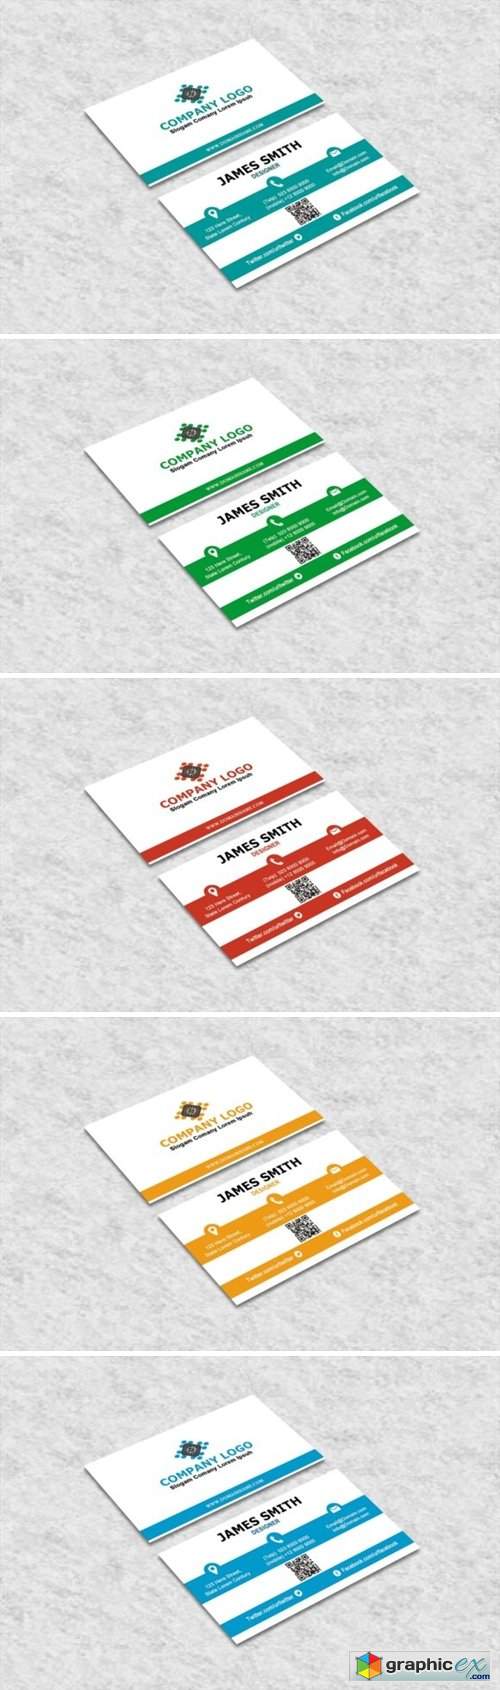 Business Cards Template 1589600